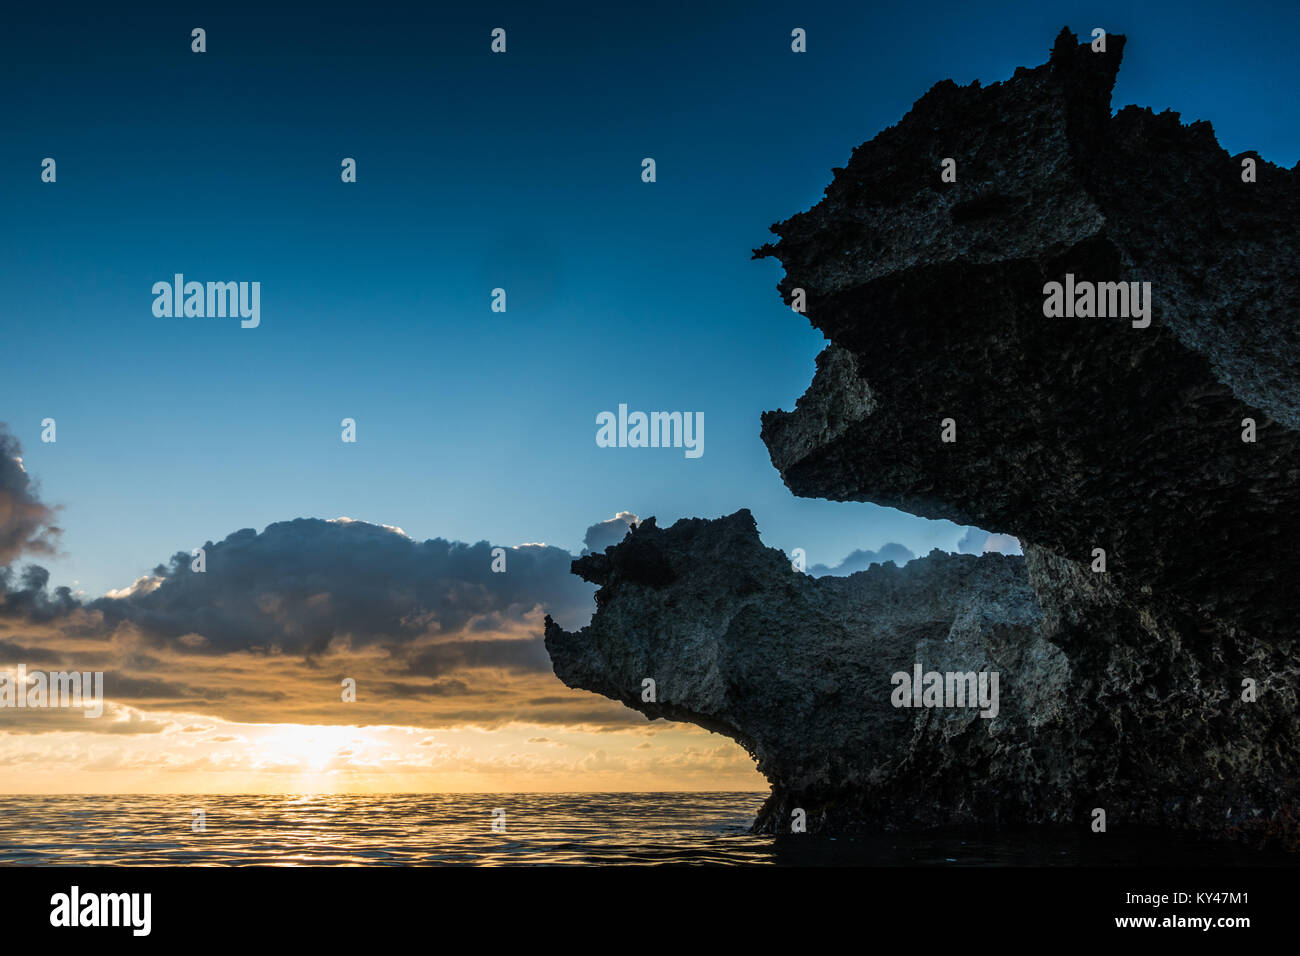 View to big volcanic rocks in sunset lights in San-Andres island, Caribbean. Stock Photo